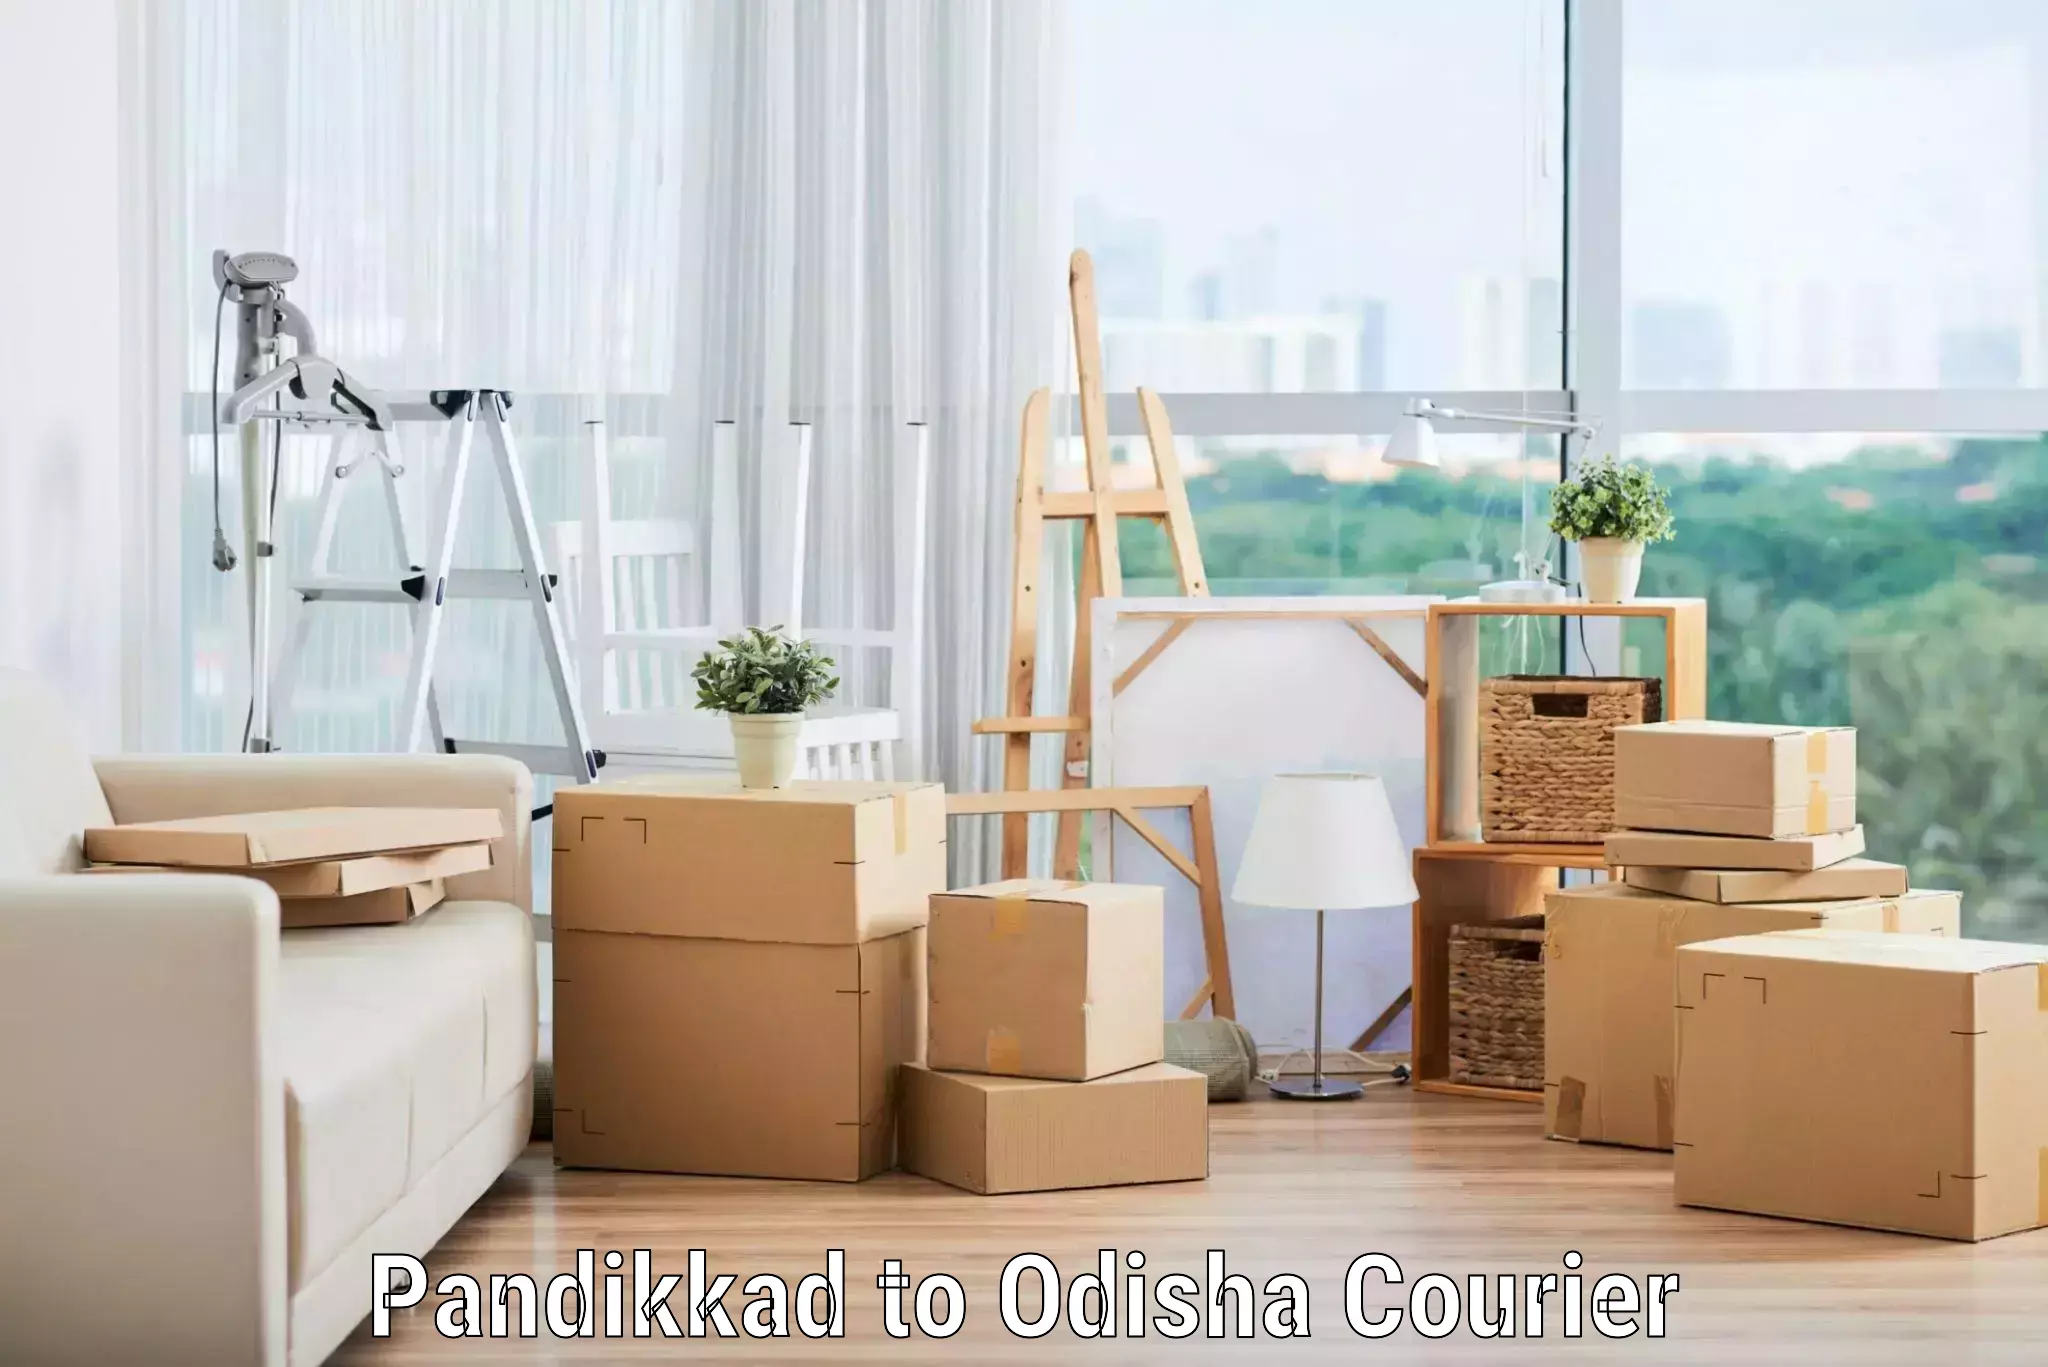 Professional movers and packers in Pandikkad to Sankerko